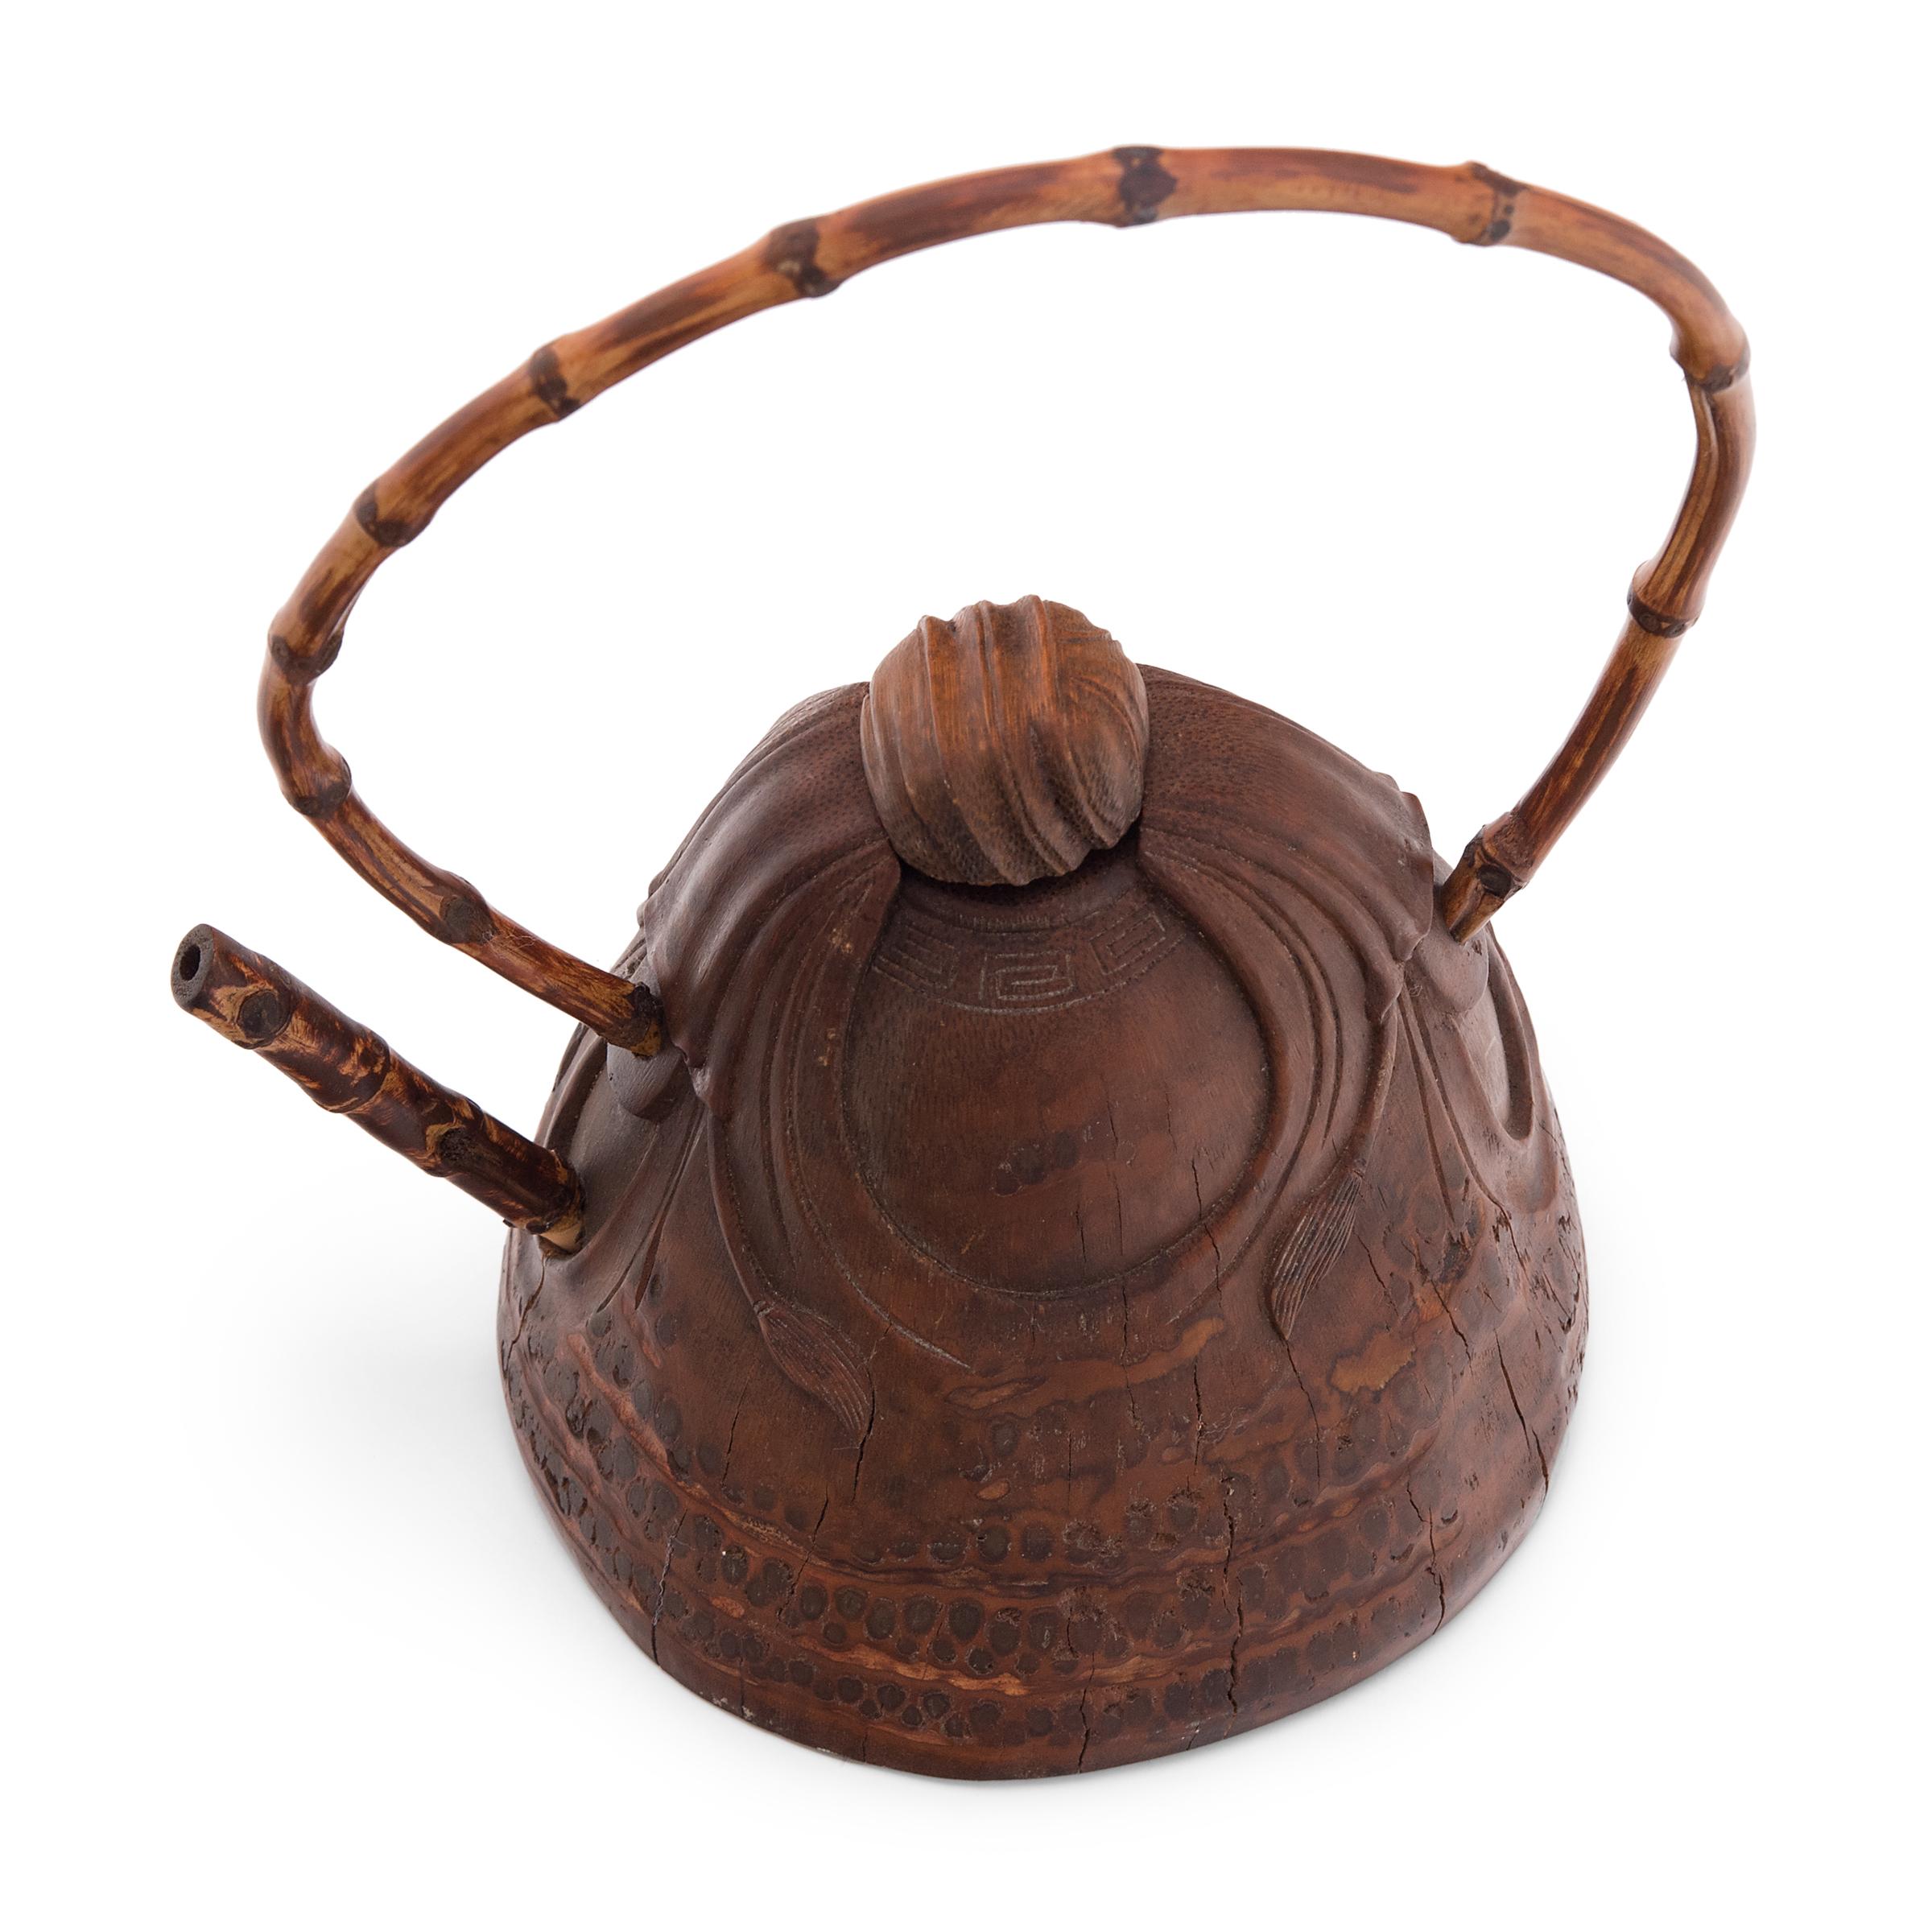 Chinese Bamboo Cloth Teapot with Arched Handle, c. 1900 In Good Condition For Sale In Chicago, IL